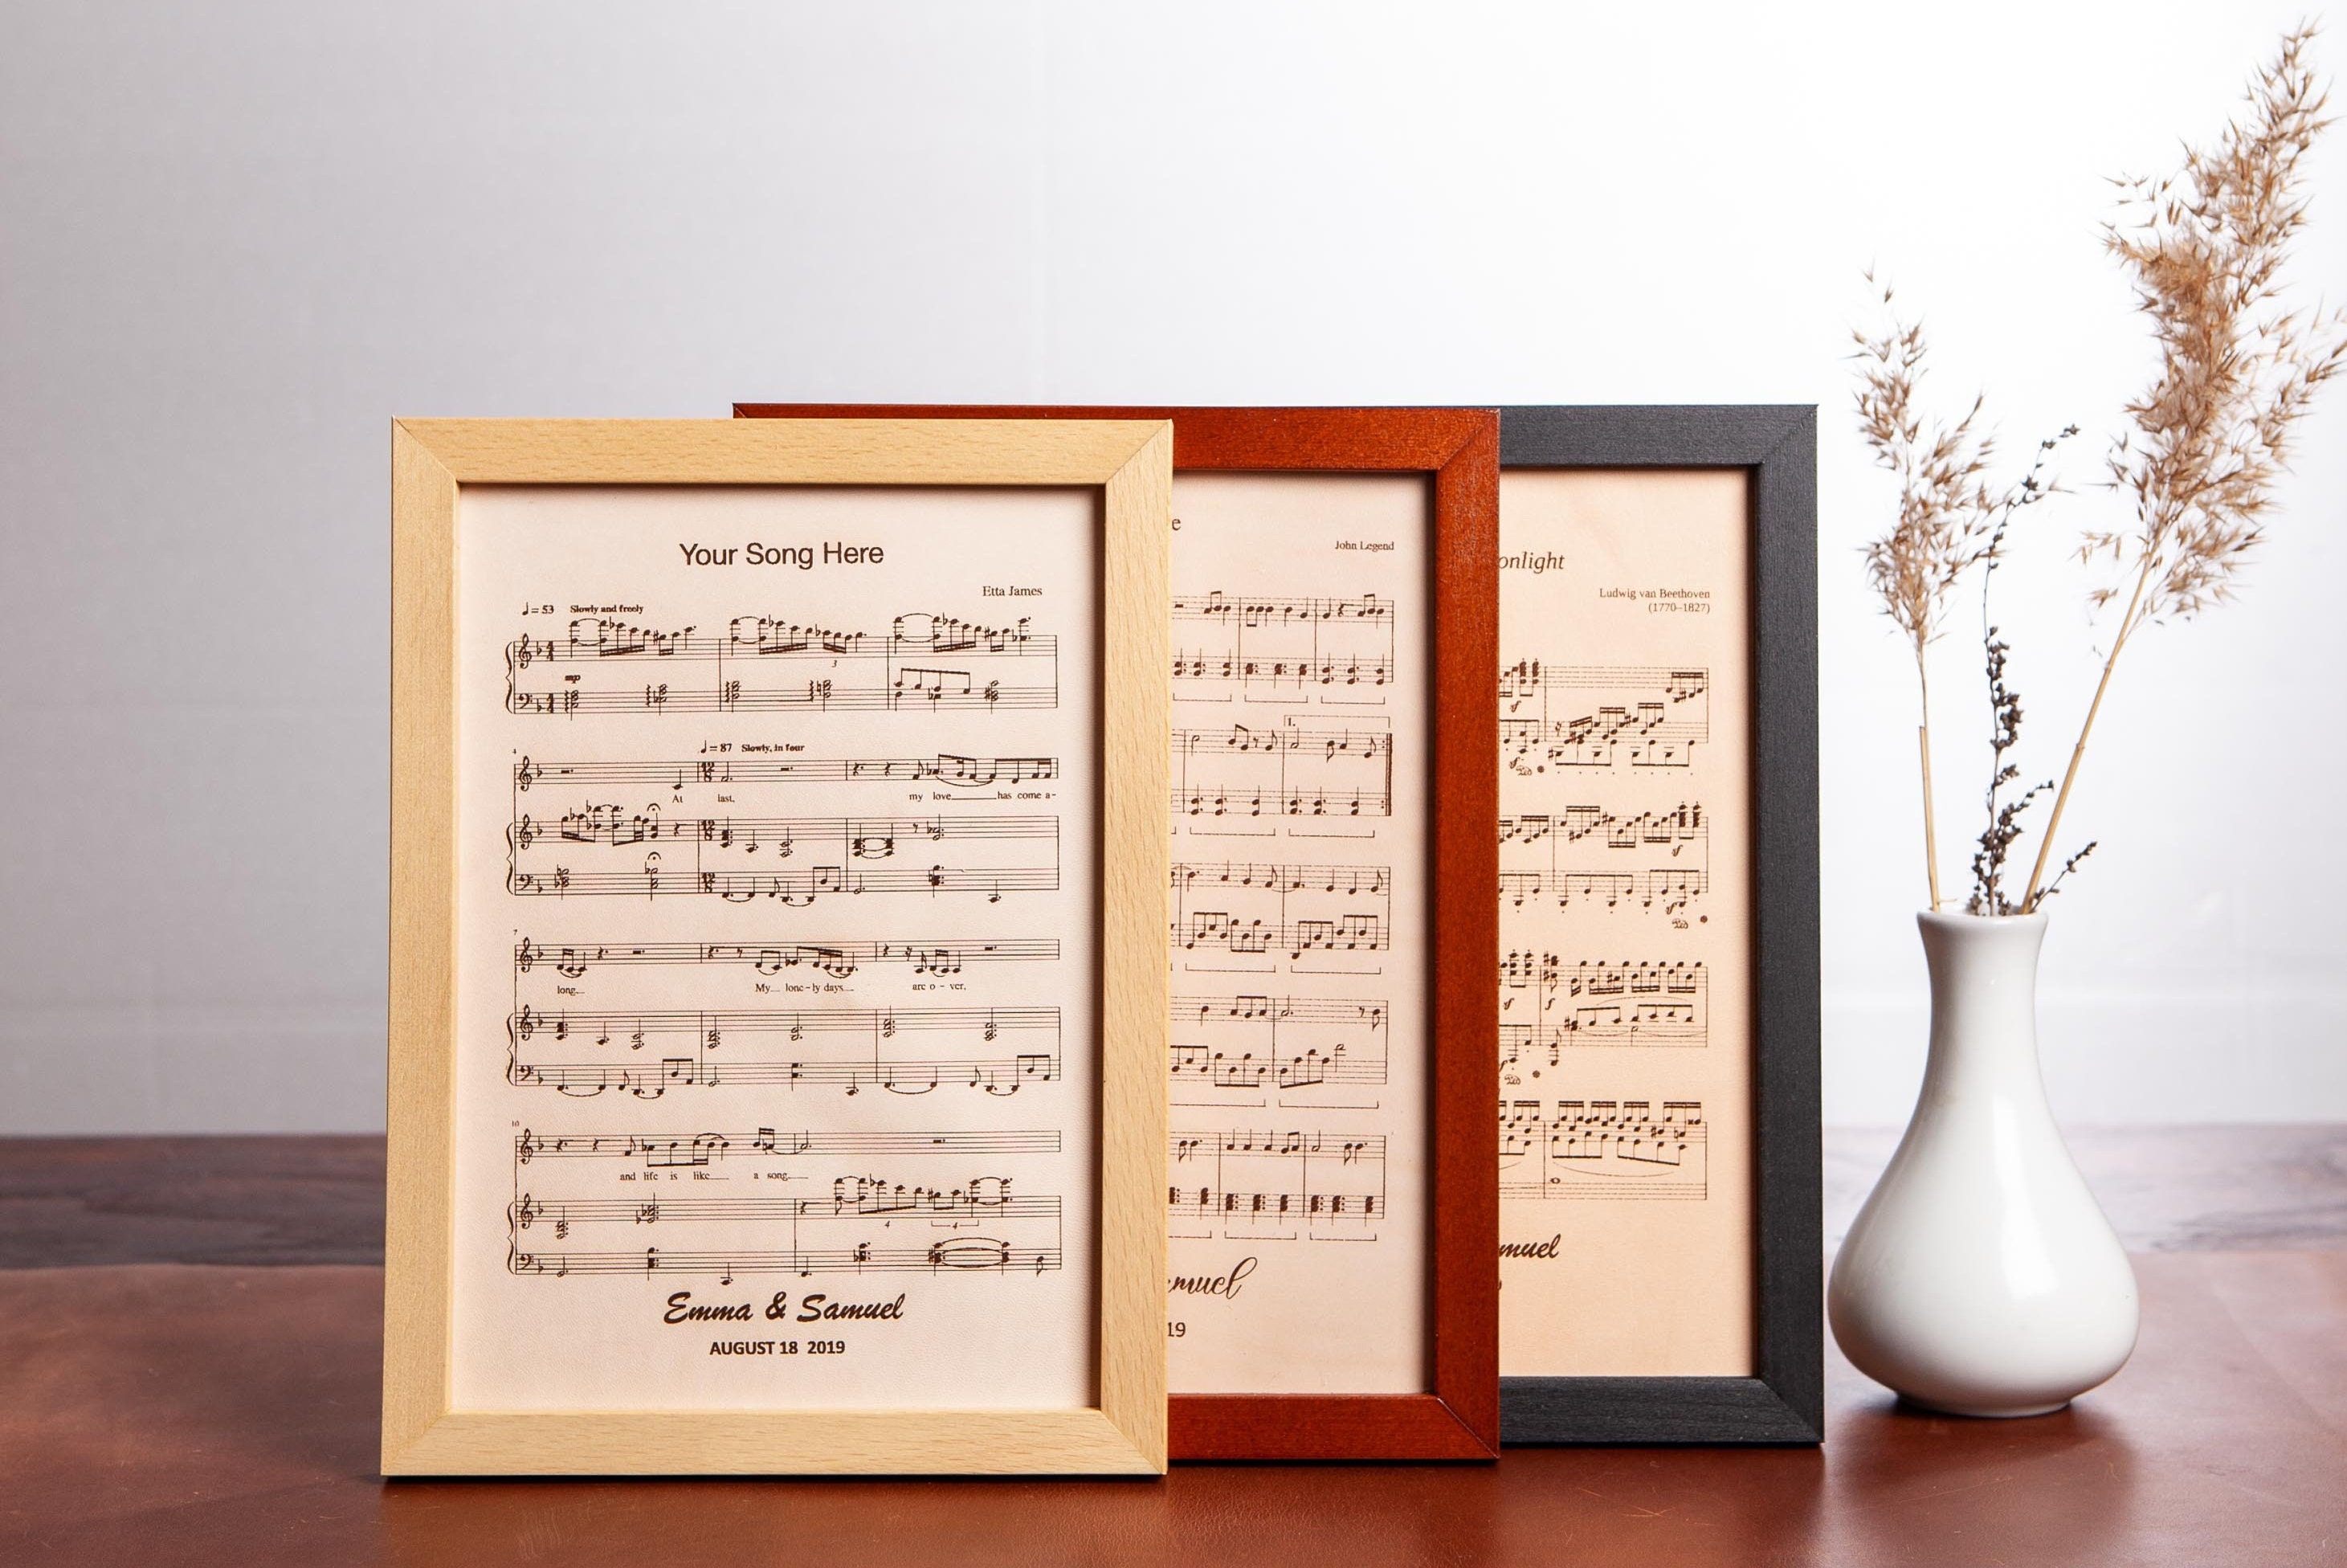 Personalized vintage leather sheet music organizer binder cover